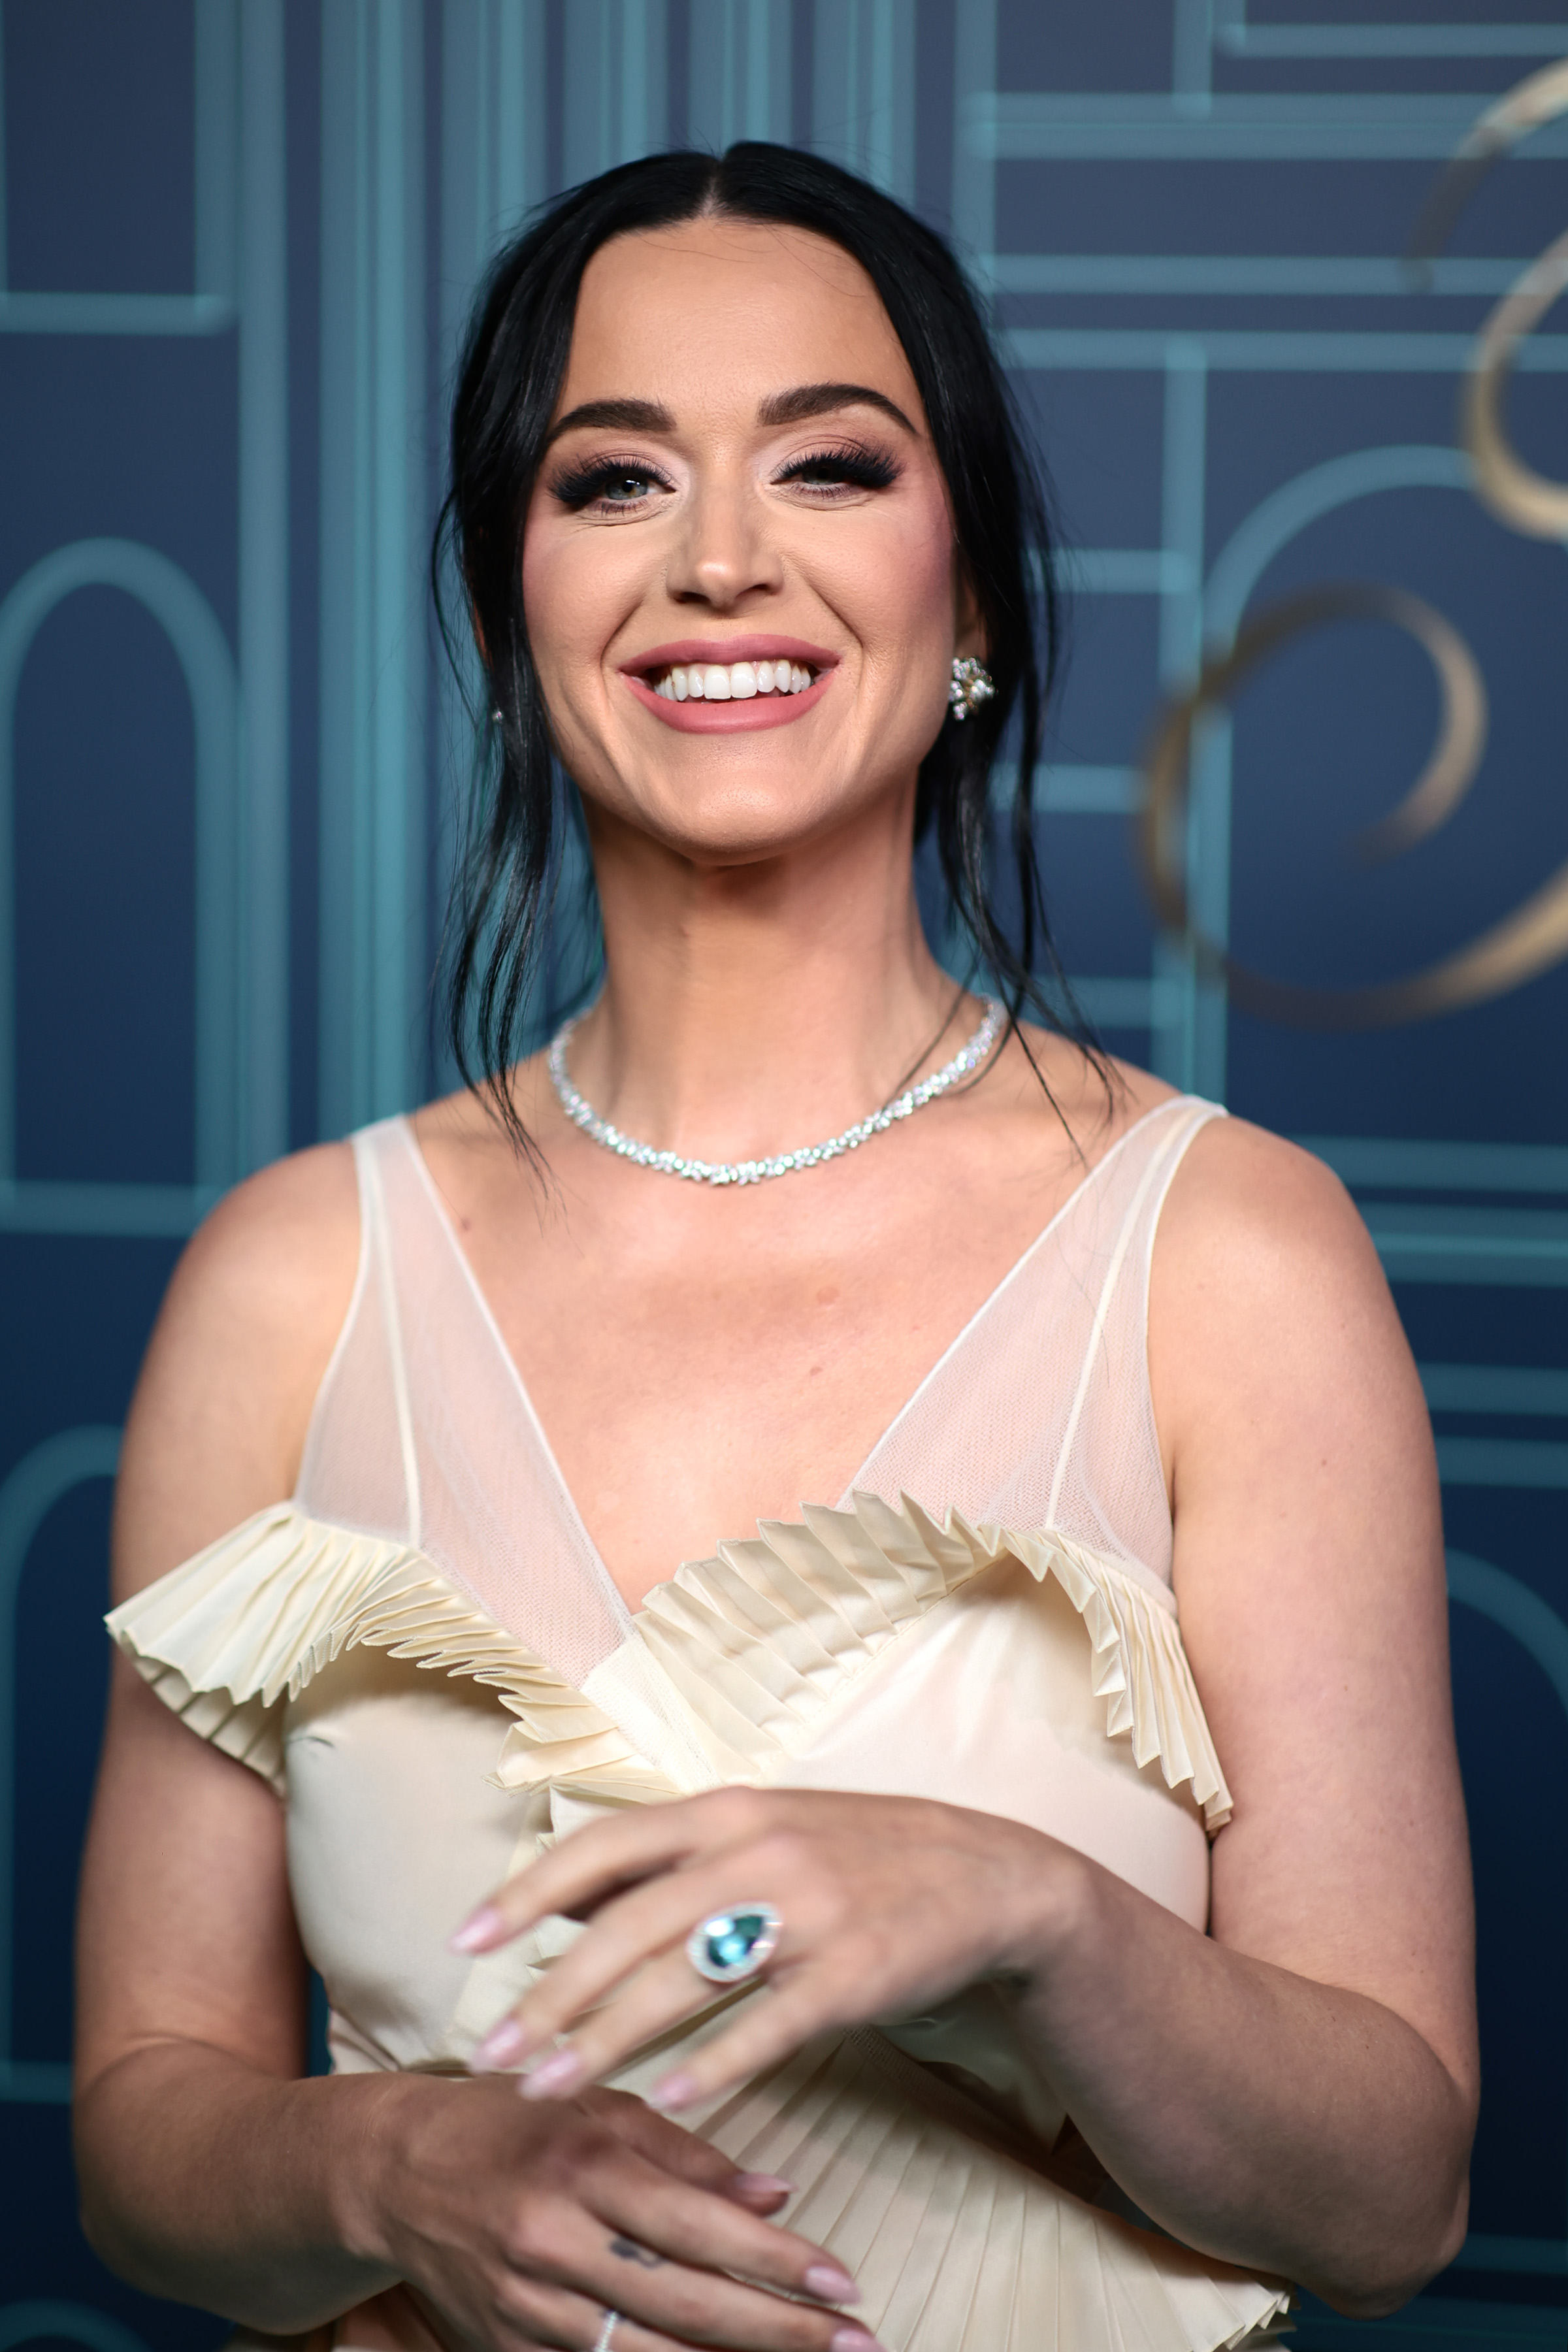 Katy Perry at the reopening of NYC Flagship store, The Landmark on April 27, 2023 in New York City | Source: Getty Images